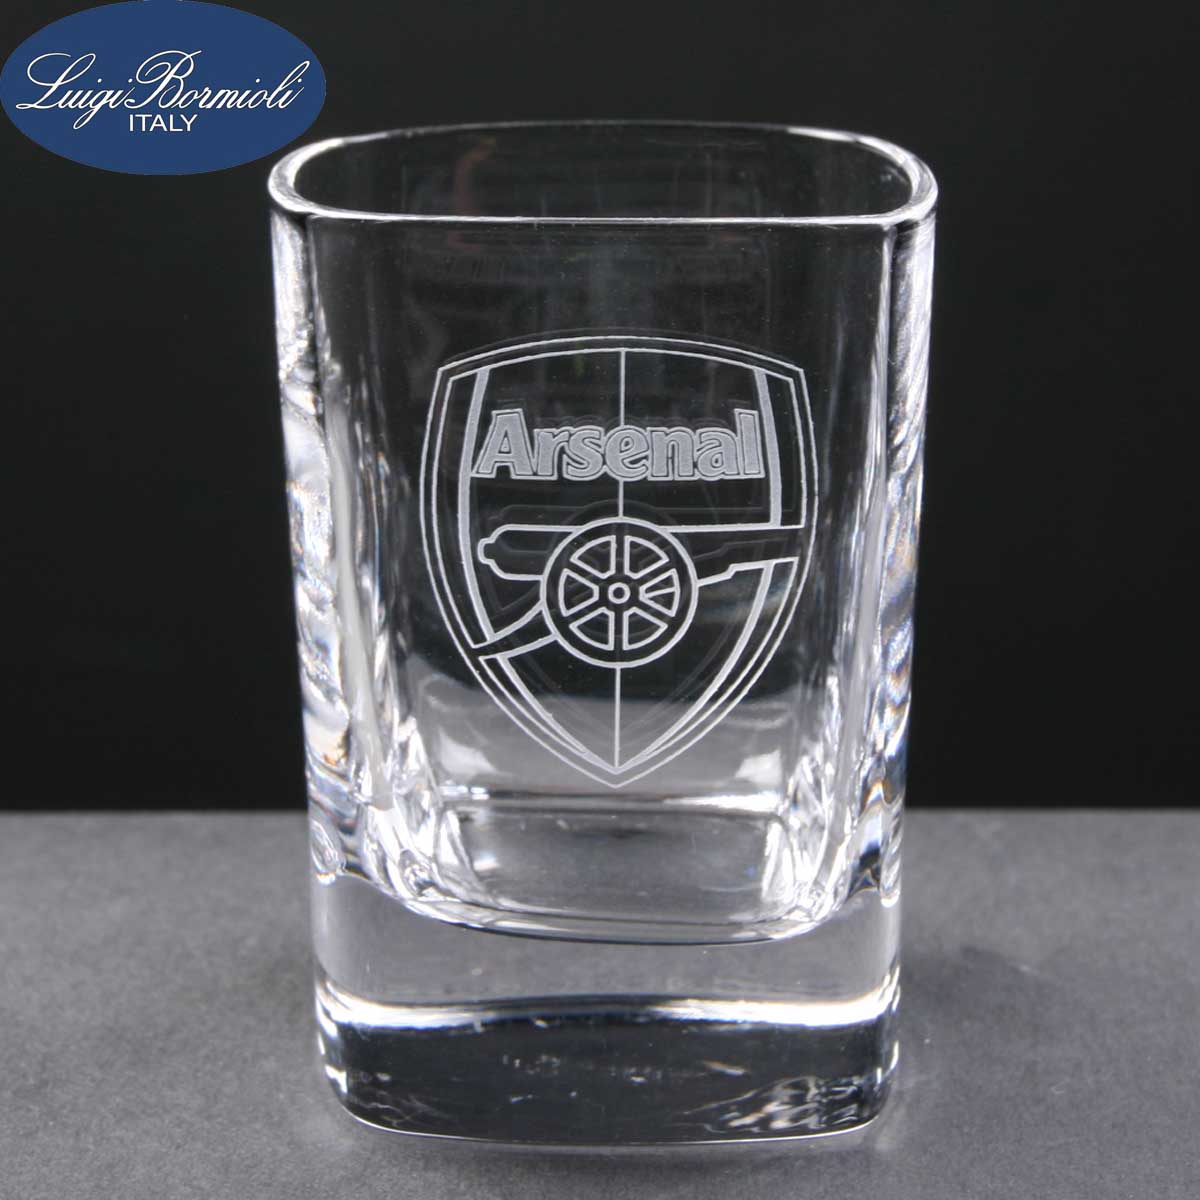 Tumbler, engraved with Corporate logo, for a Business Gift.